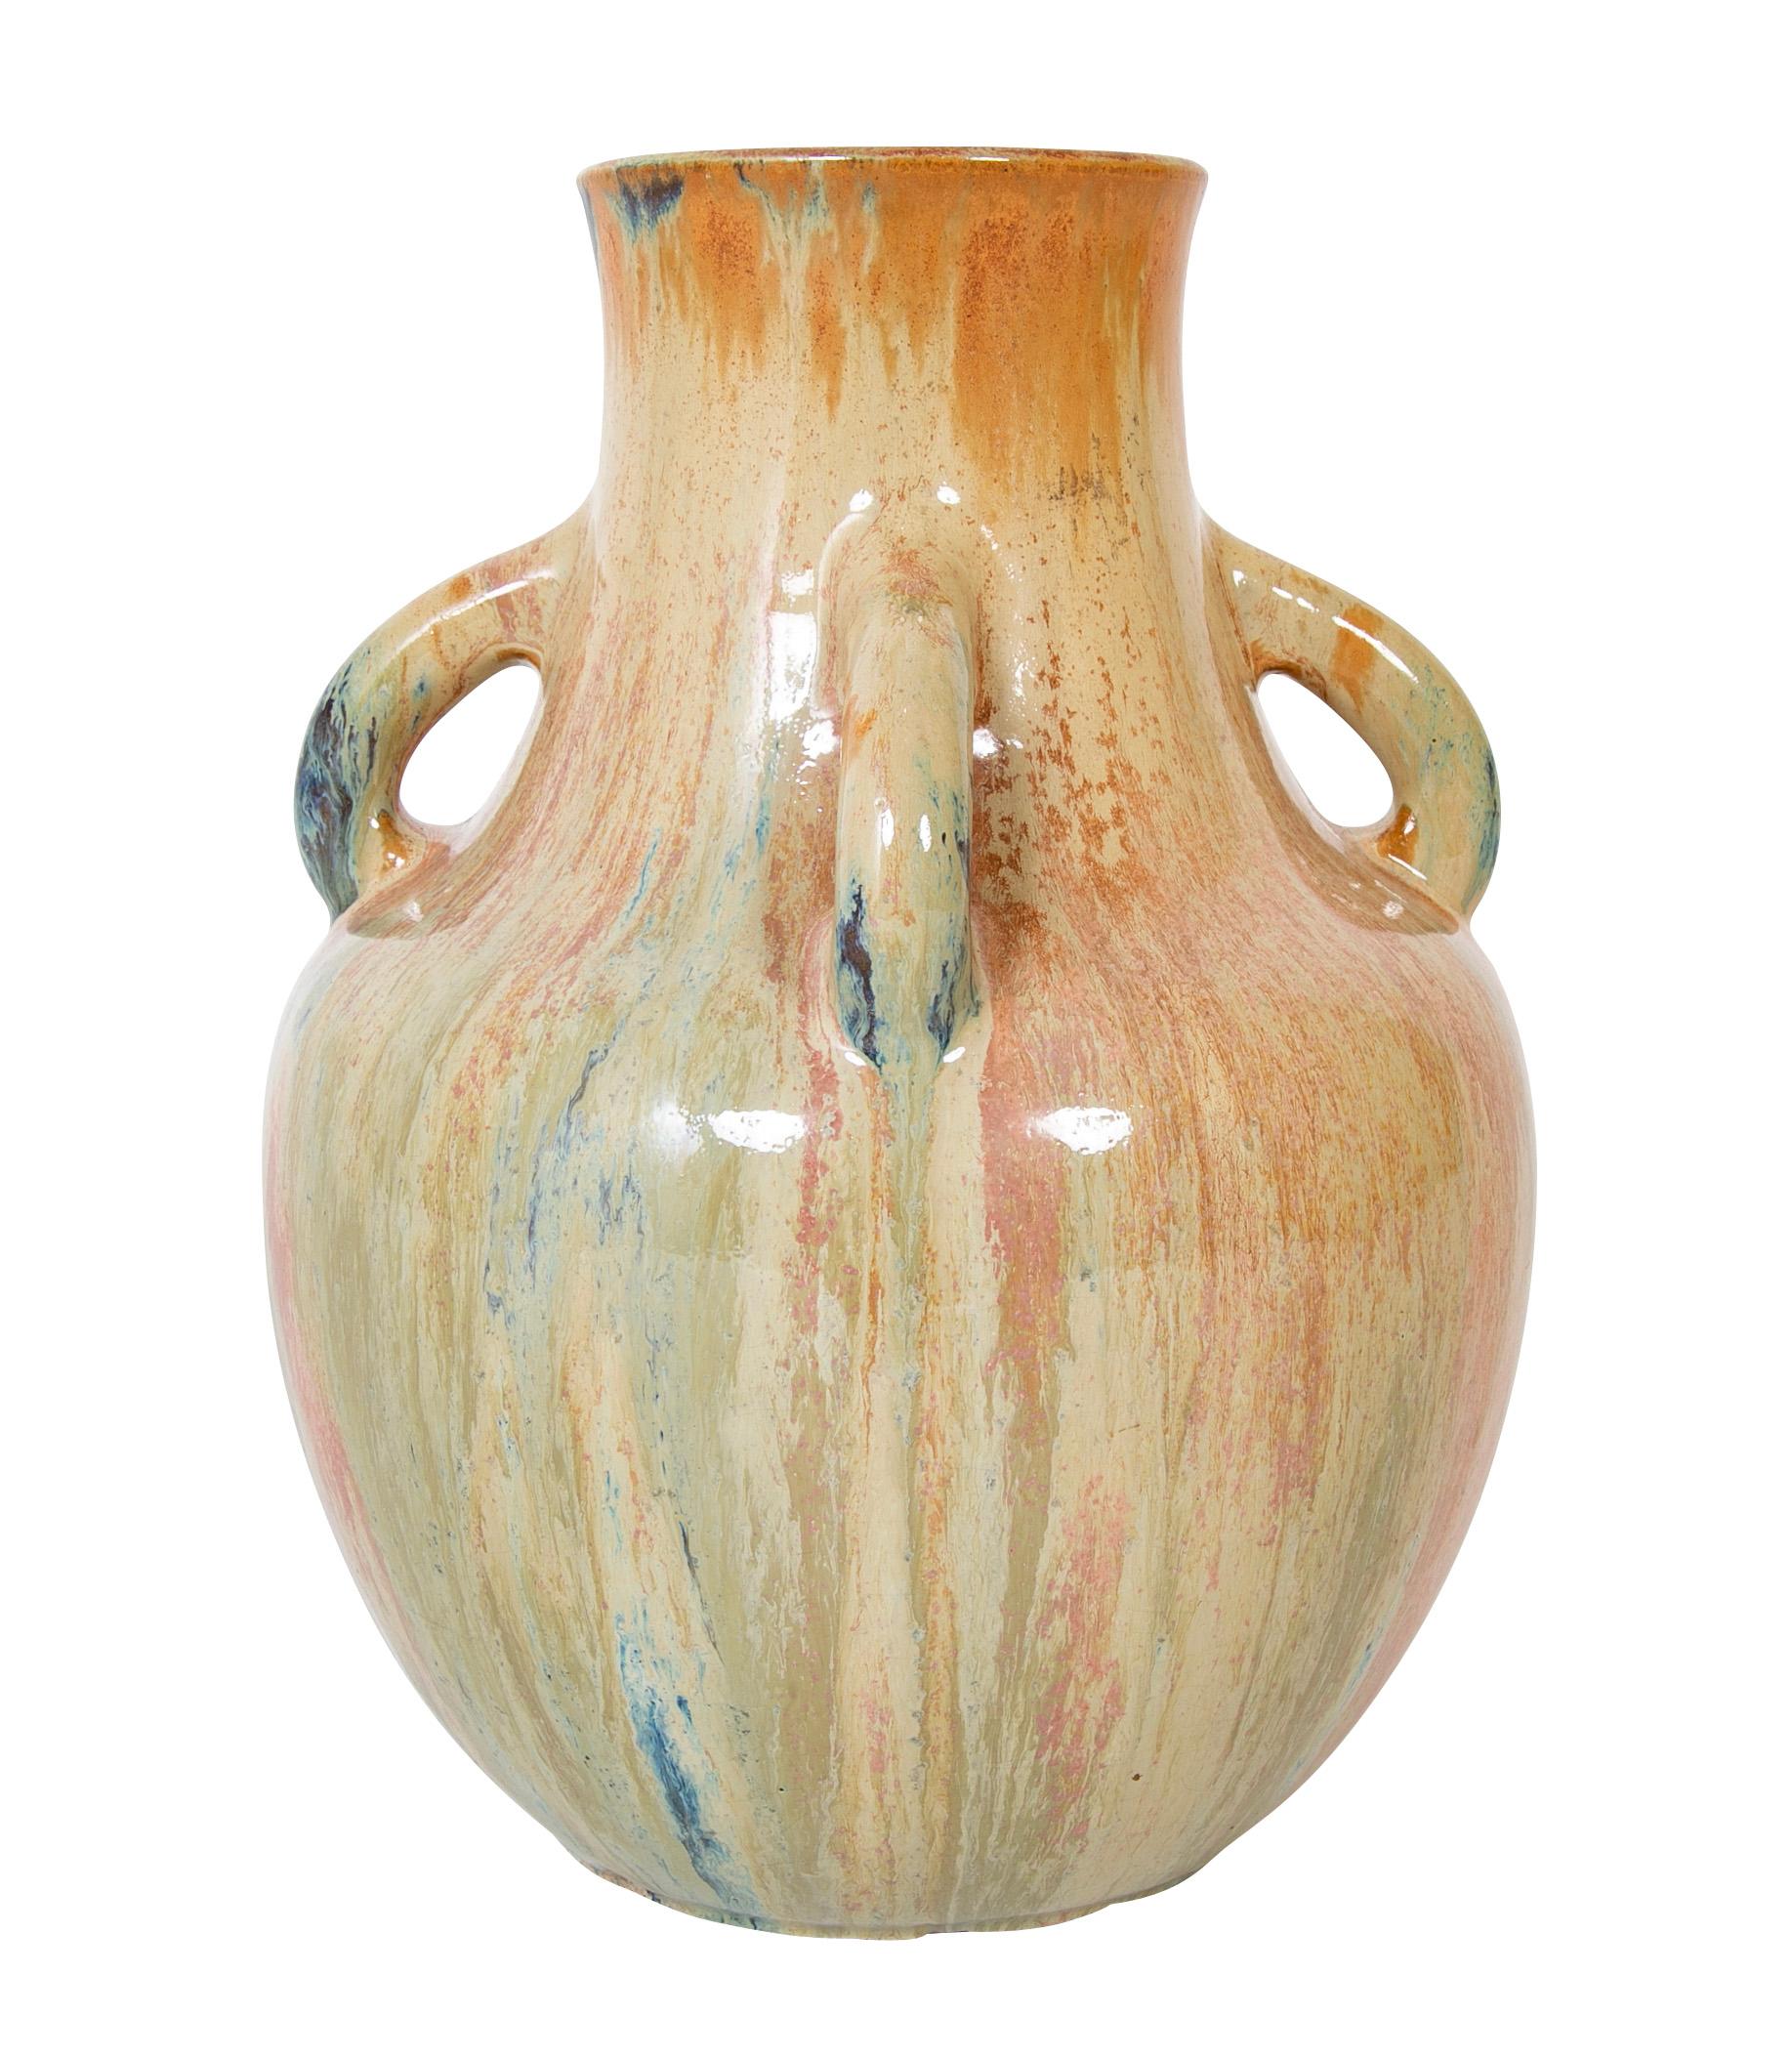 Auguste Delaherche ( French. 1857 - 1940 ) four handled stoneware vase with flambe crystalline glaze.  France with makers Stamped.  Circa 1898.
Auguste Delaherche - Historic - Jason Jacques Gallery
A bit about Auguste Delaherche from Jason Jacques's